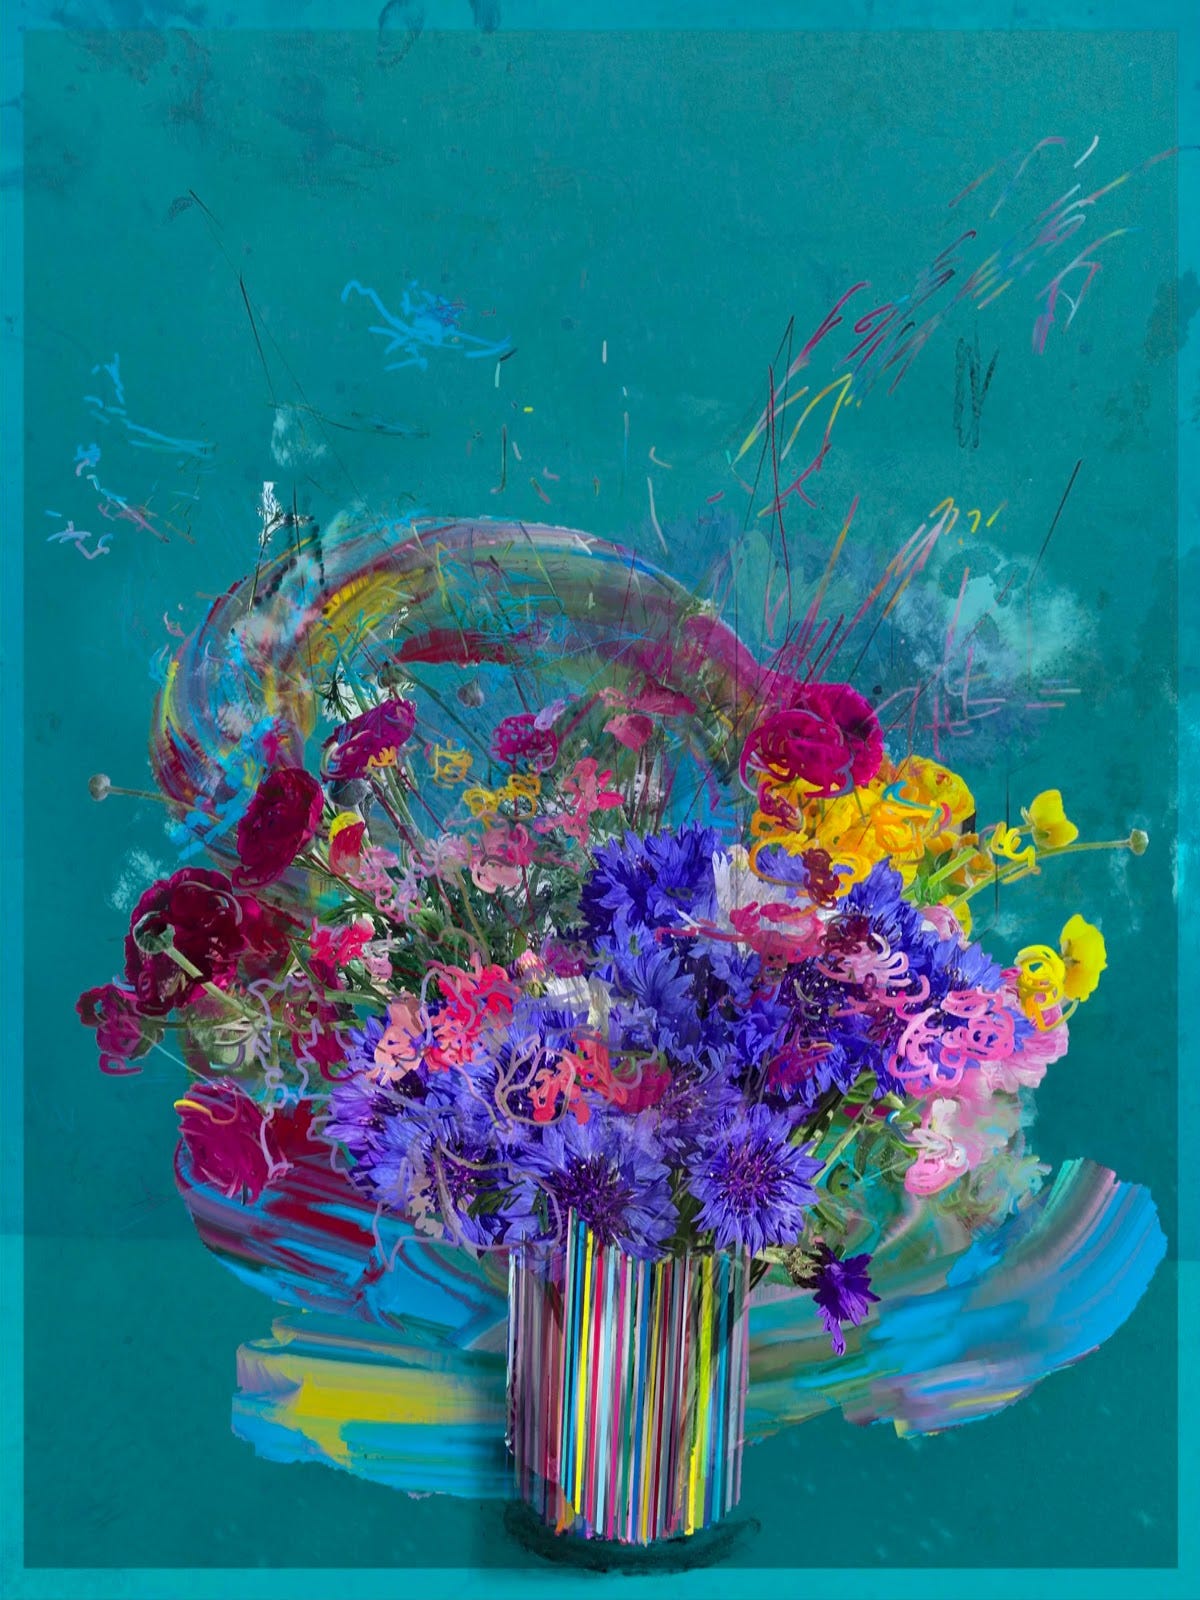 Interview with Petra Cortright